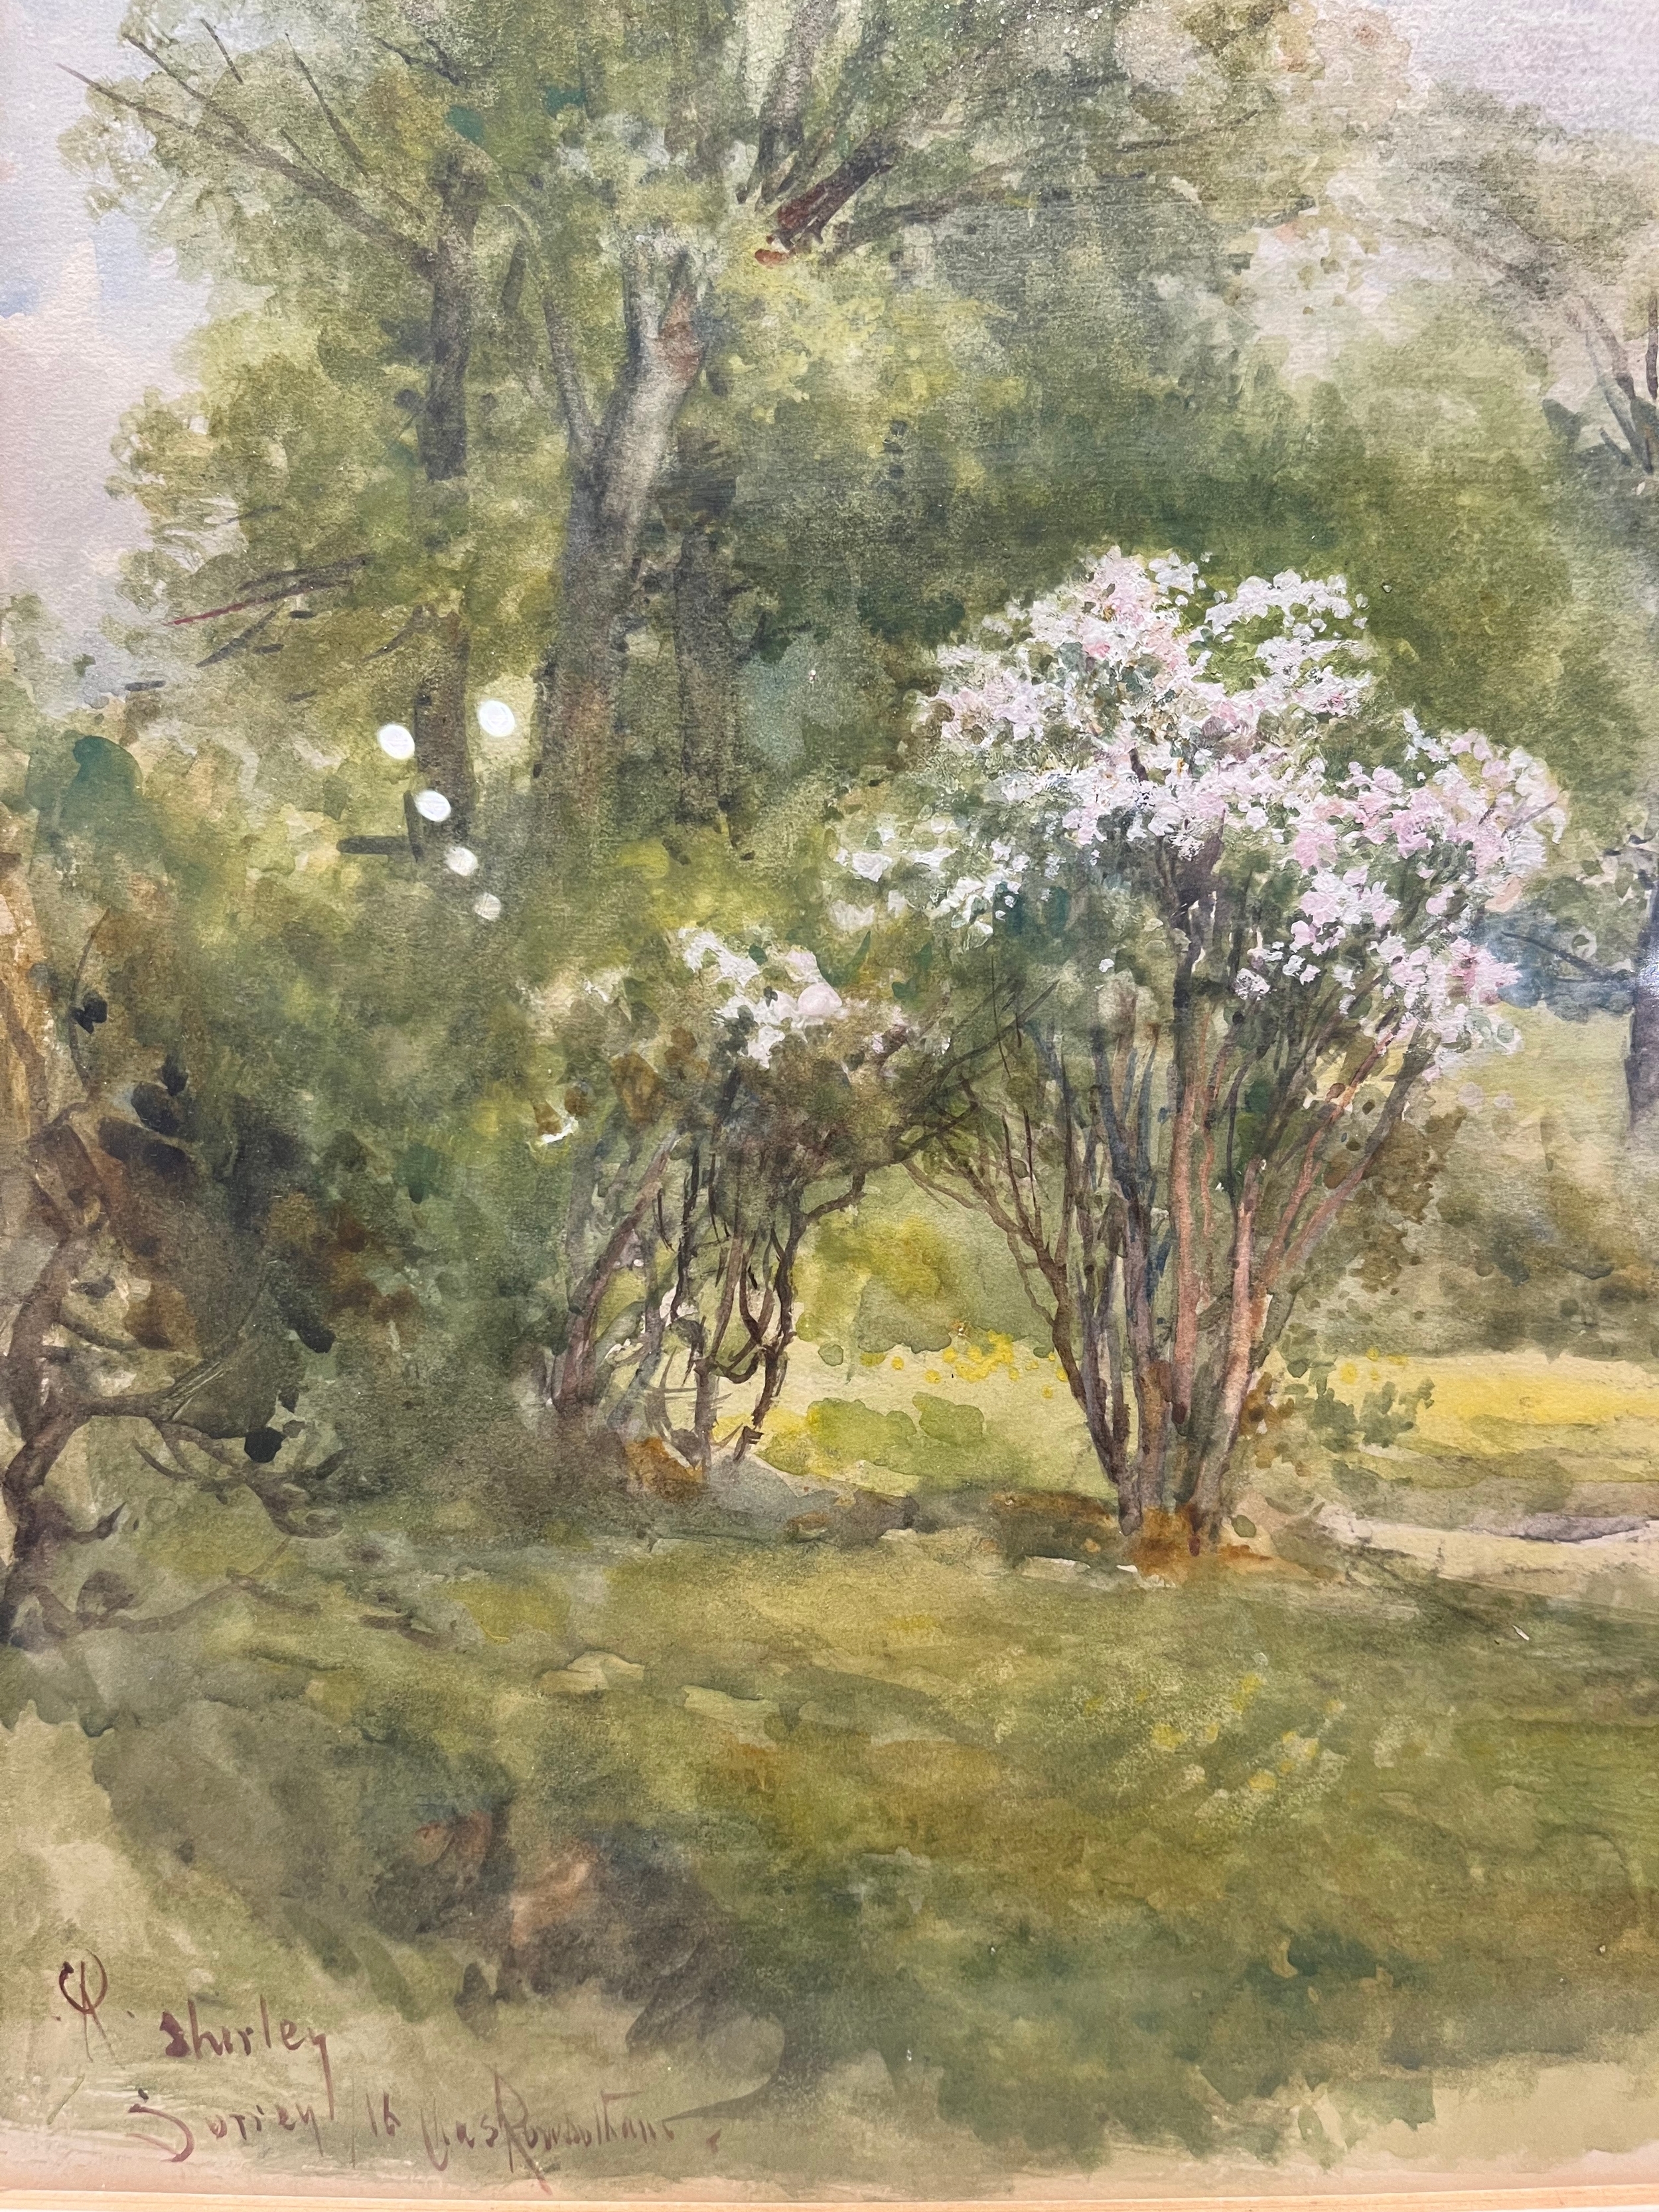 Artwork by Charles Edmund Rowbotham, Shirley, Surrey, Made of Watercolour on paper